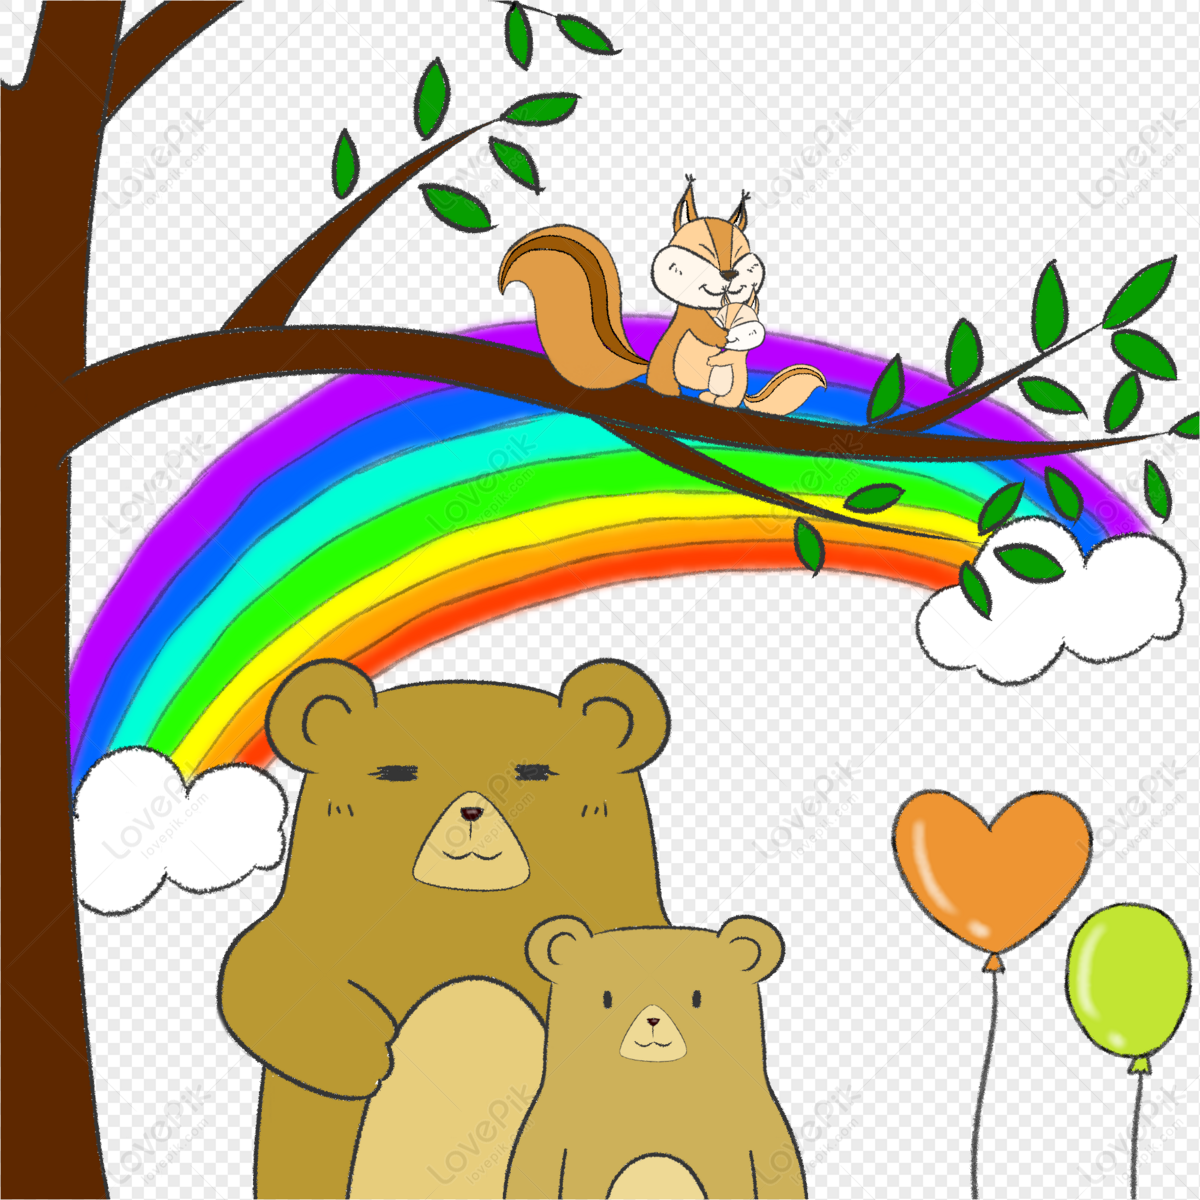 Small Animal Mother And Child PNG Transparent And Clipart Image For Free  Download - Lovepik | 401120356